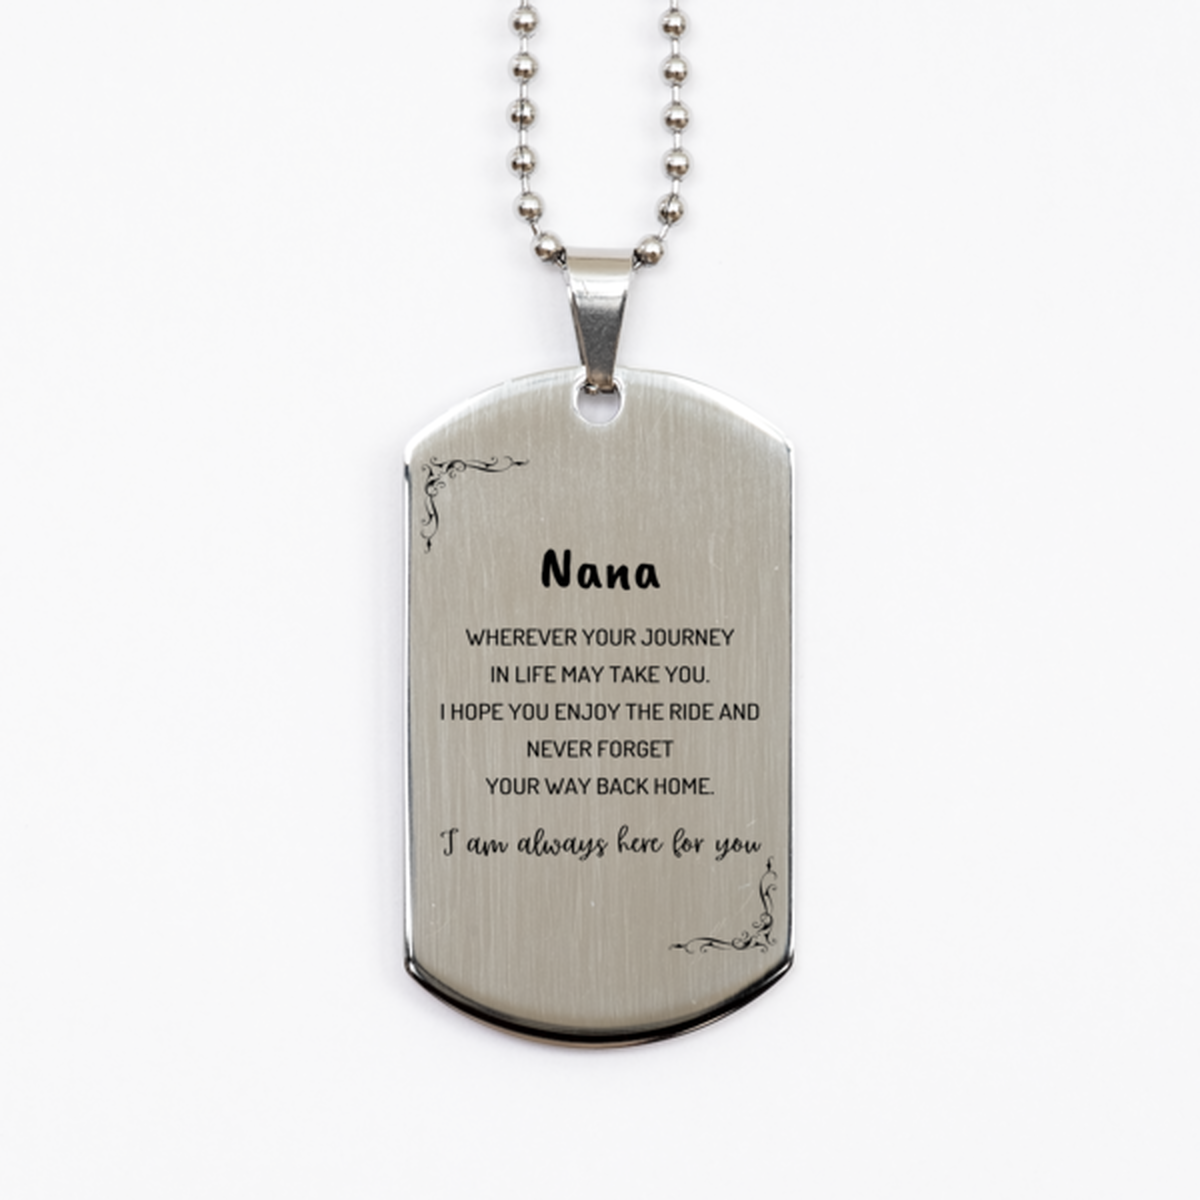 Nana wherever your journey in life may take you, I am always here for you Nana Silver Dog Tag, Awesome Christmas Gifts For Nana, Nana Birthday Gifts for Men Women Family Loved One